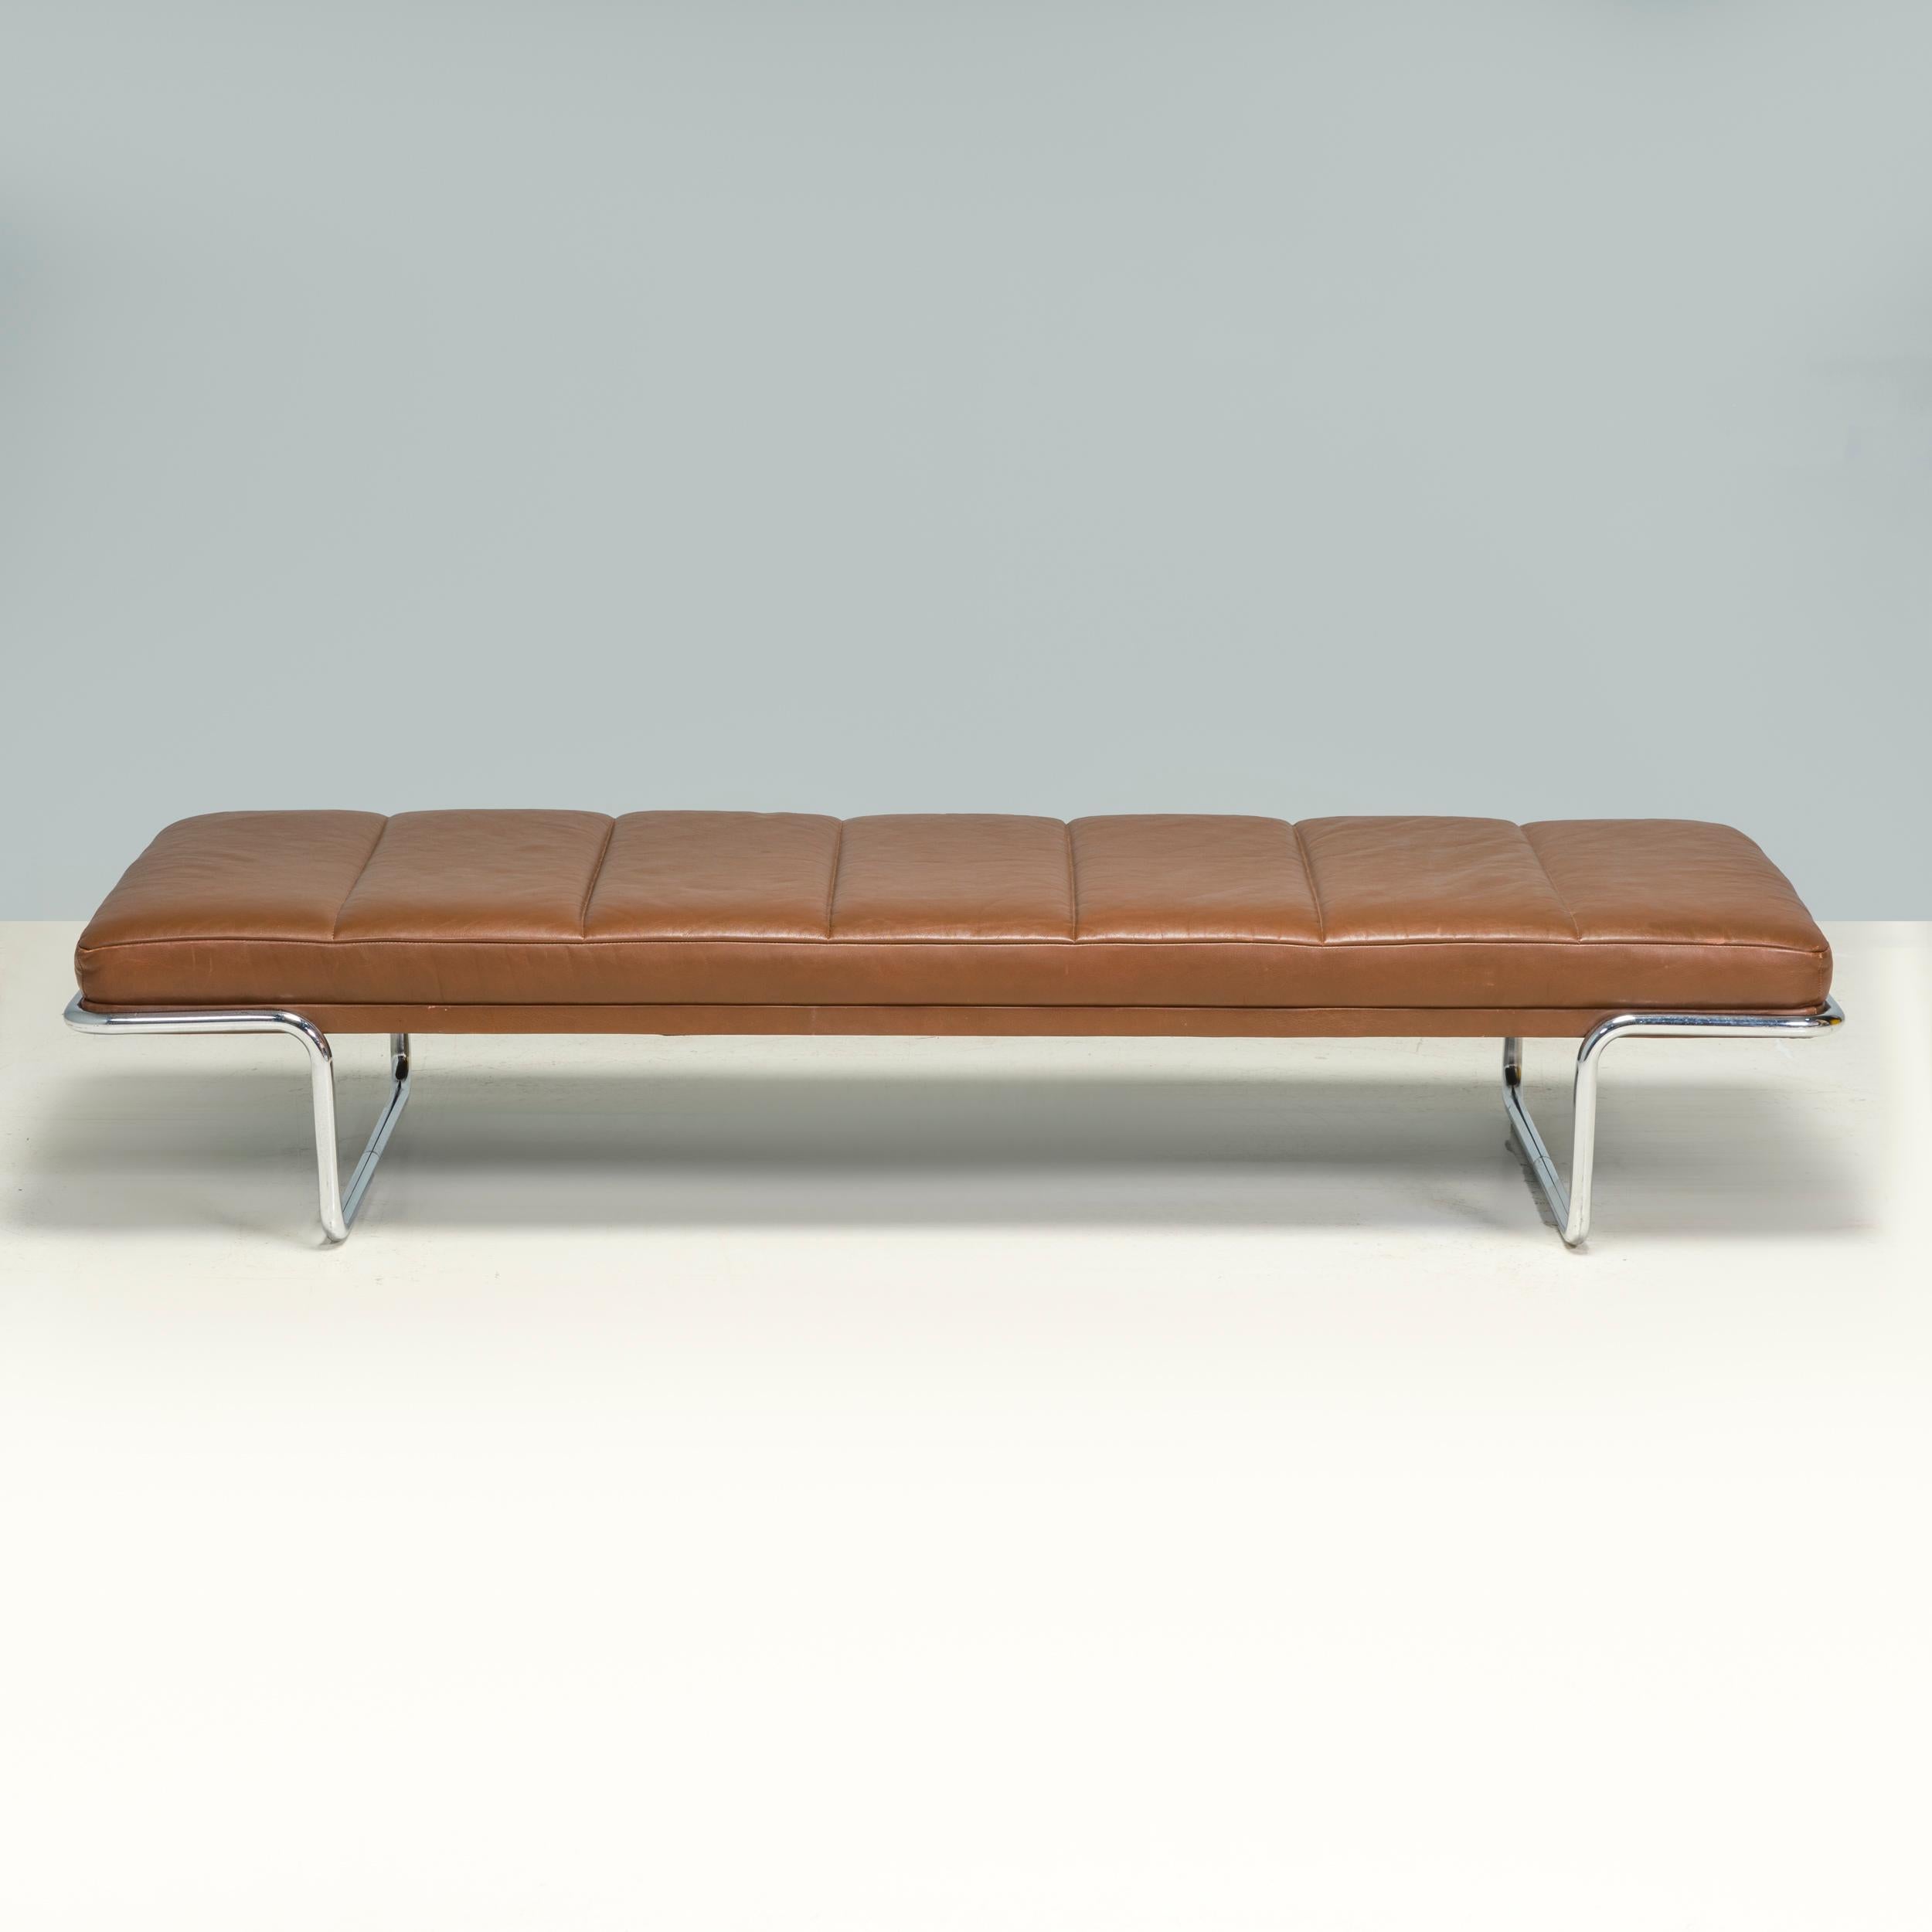 Originally designed by Bernd Münzebrock in 1973 and manufactured by Walter Knoll, this daybed is reminiscent of the iconic Bauhaus designs from the 1930s.

Constructed from a chrome plated tubular steel frame, the legs are cantilevered at each end,